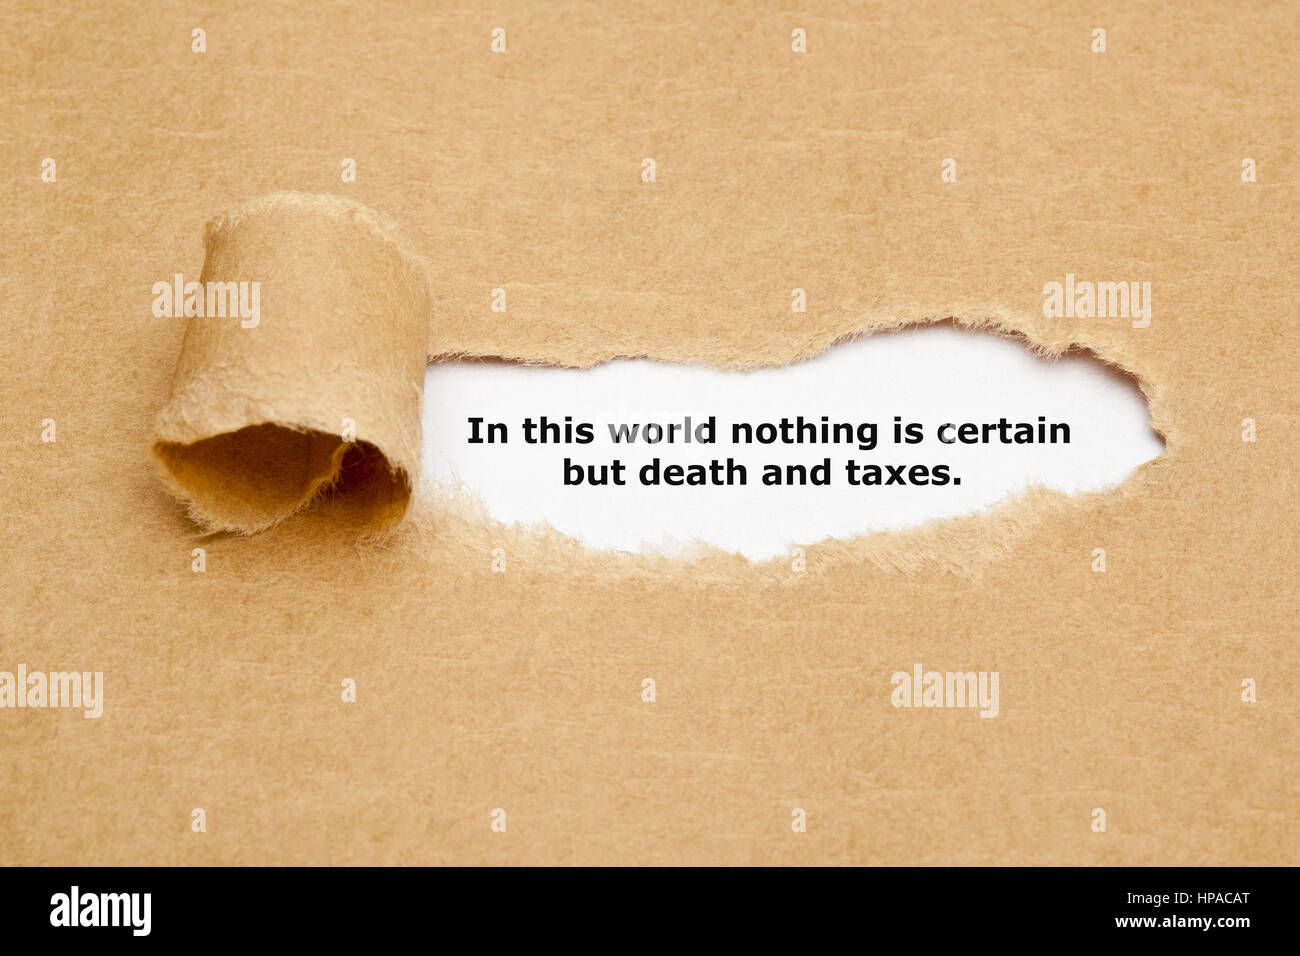 Quote In this world nothing is certain but death and taxes, appearing behind ripped brown paper. Stock Photo